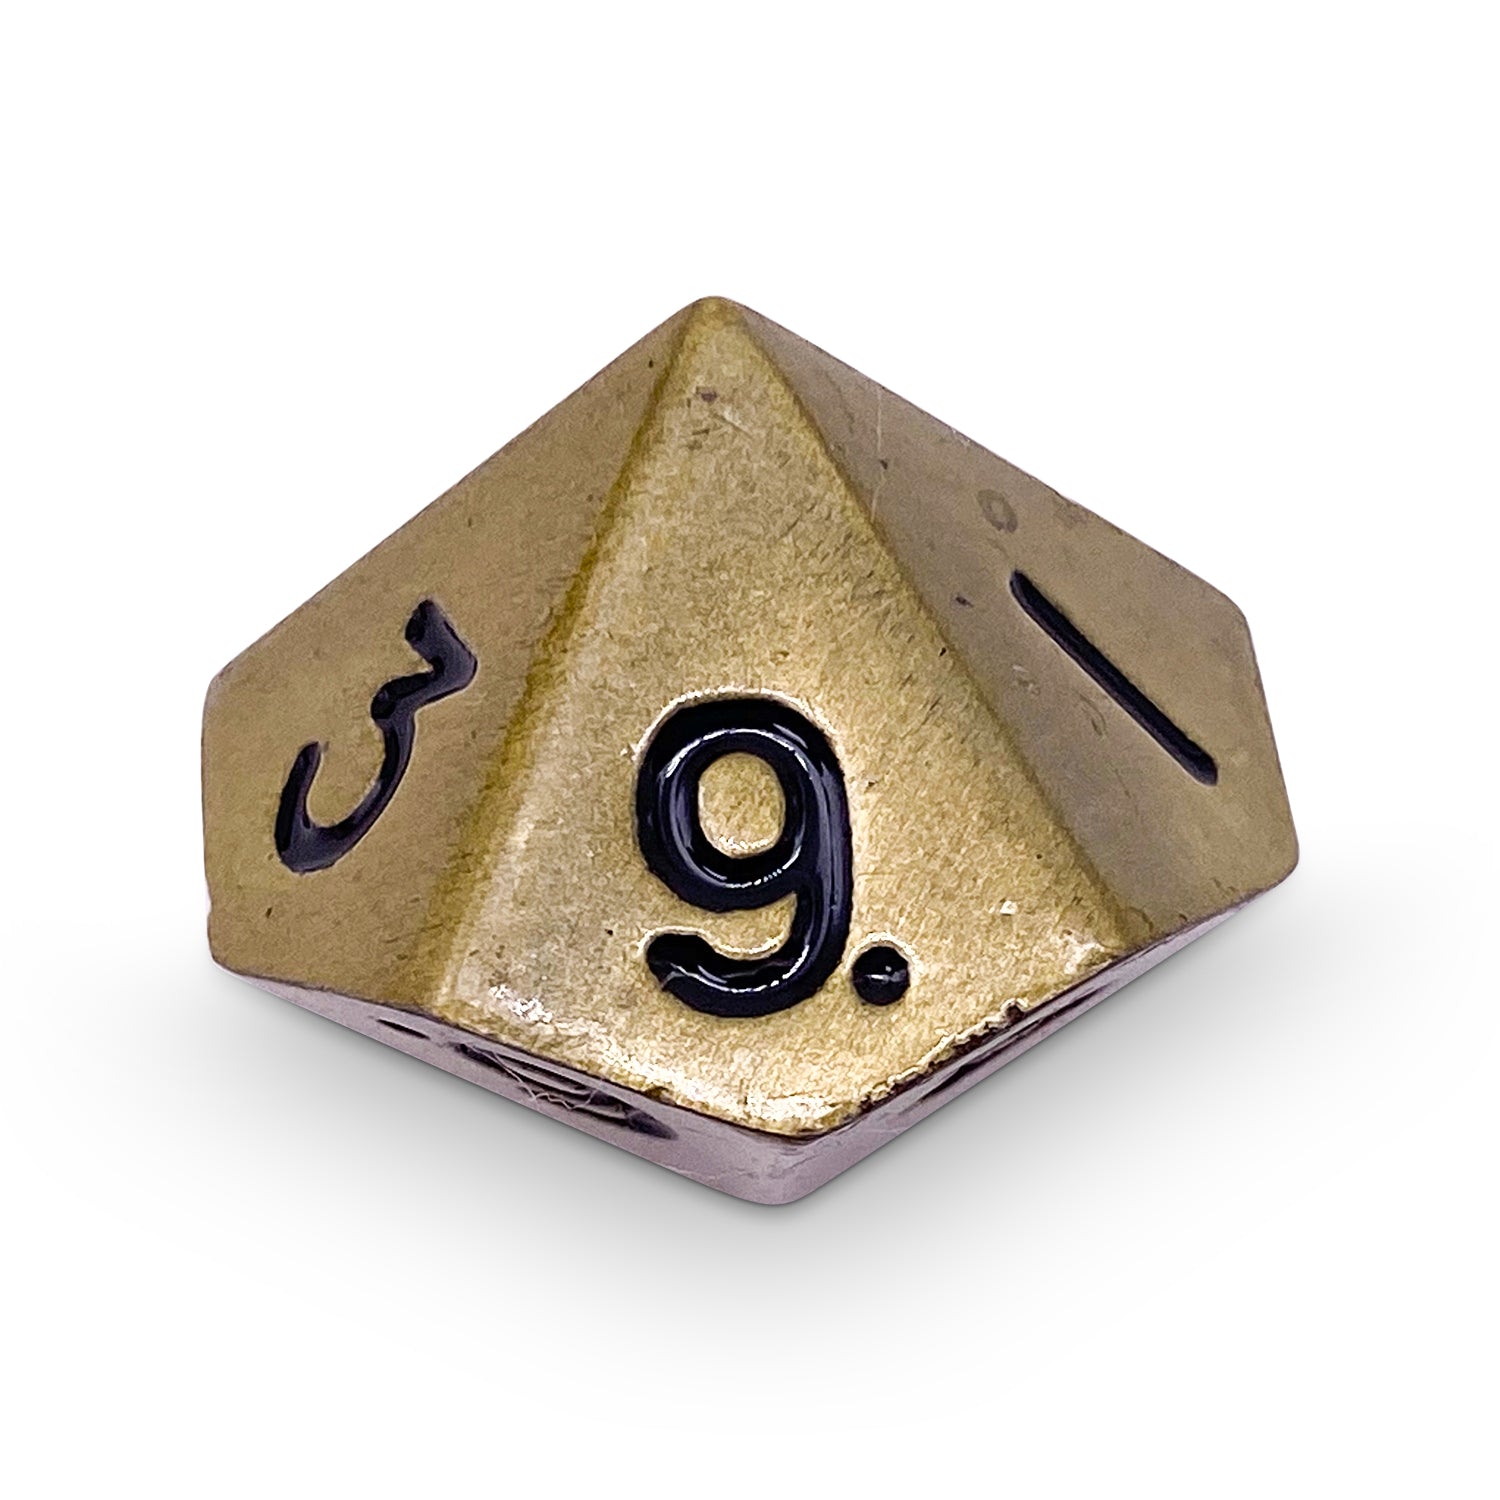 Single Alloy D10 in Bronze Dragon Scale by